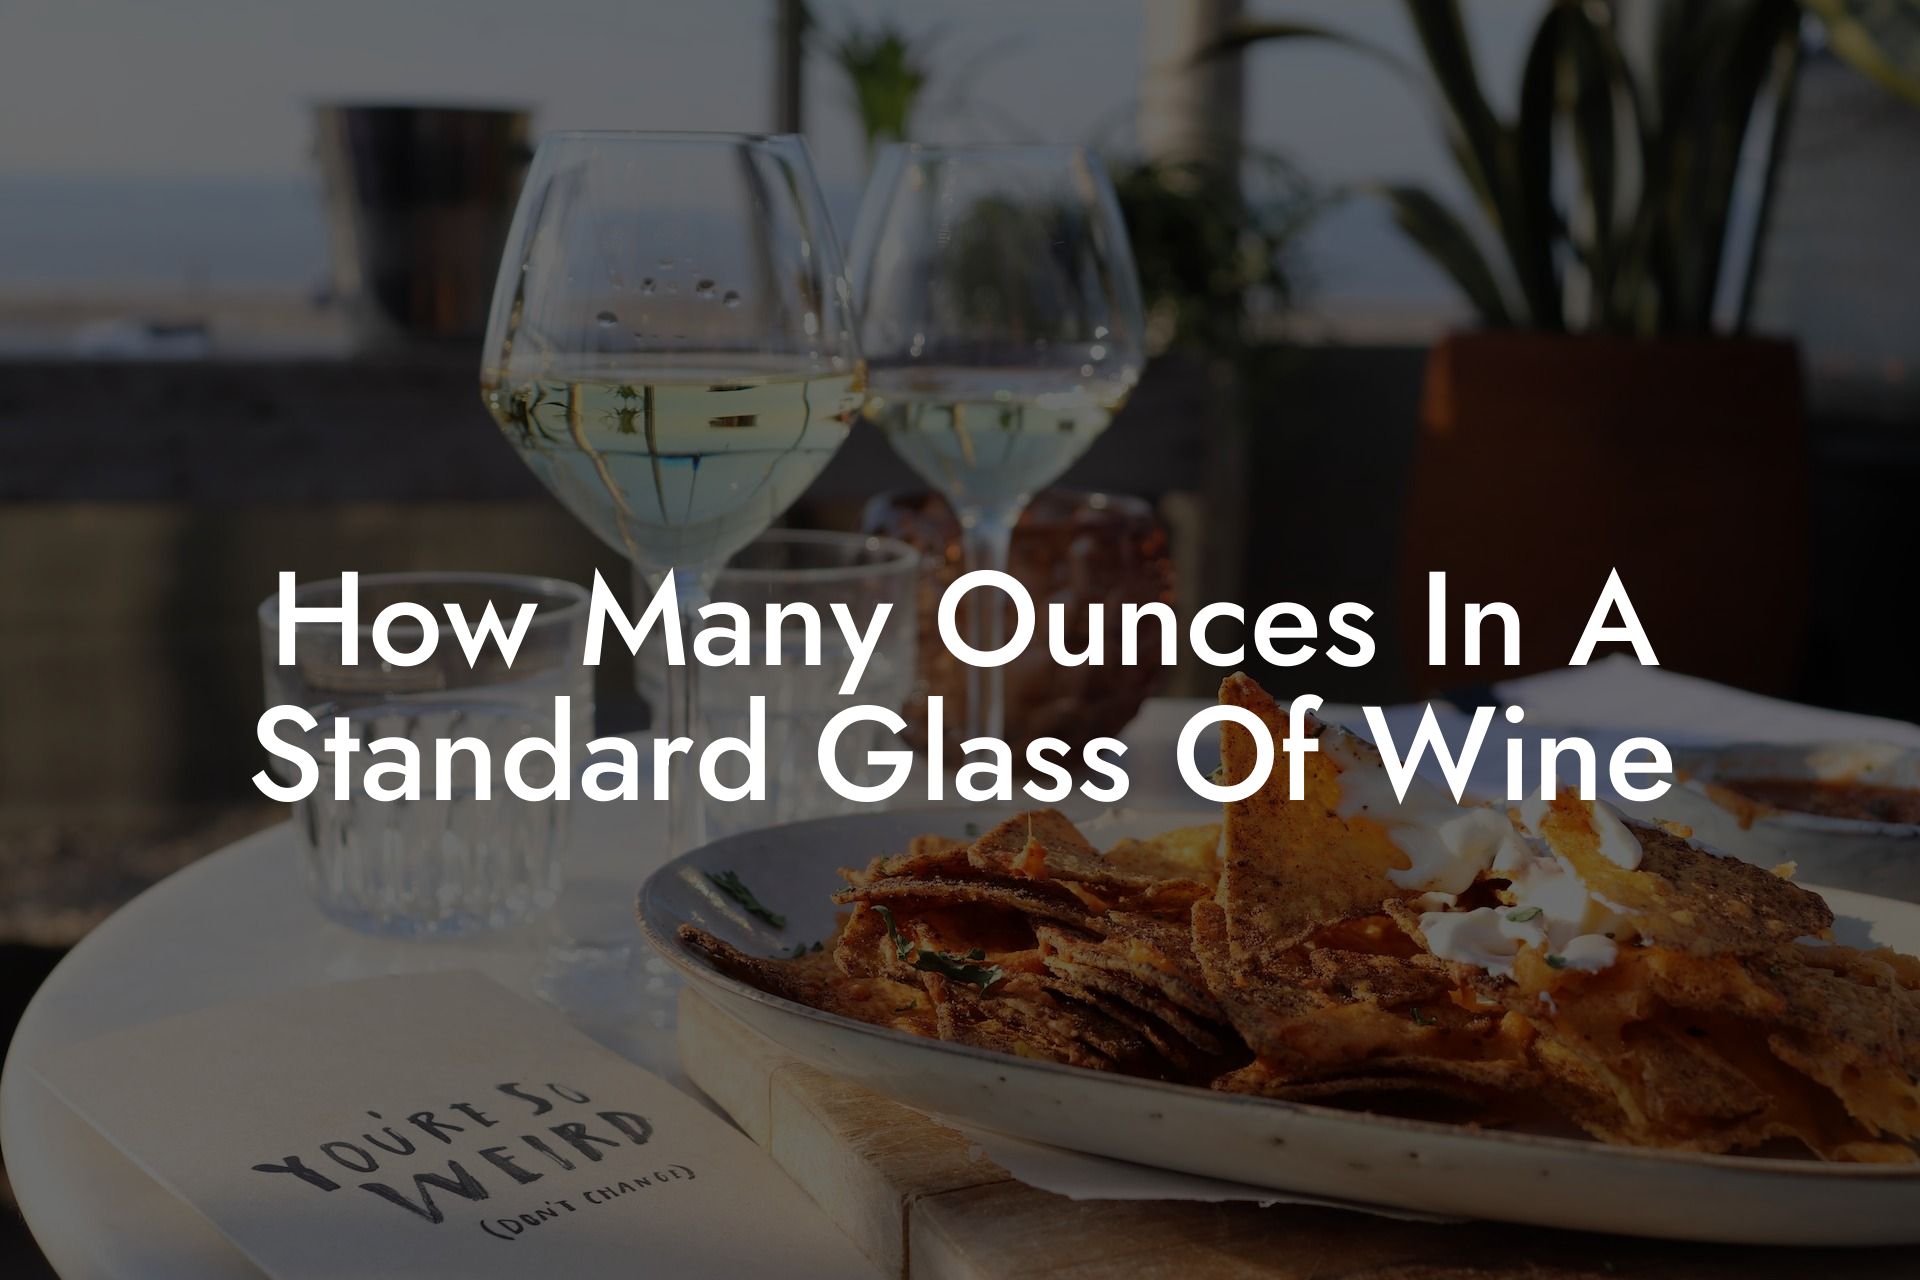 How Many Ounces In A Standard Glass Of Wine